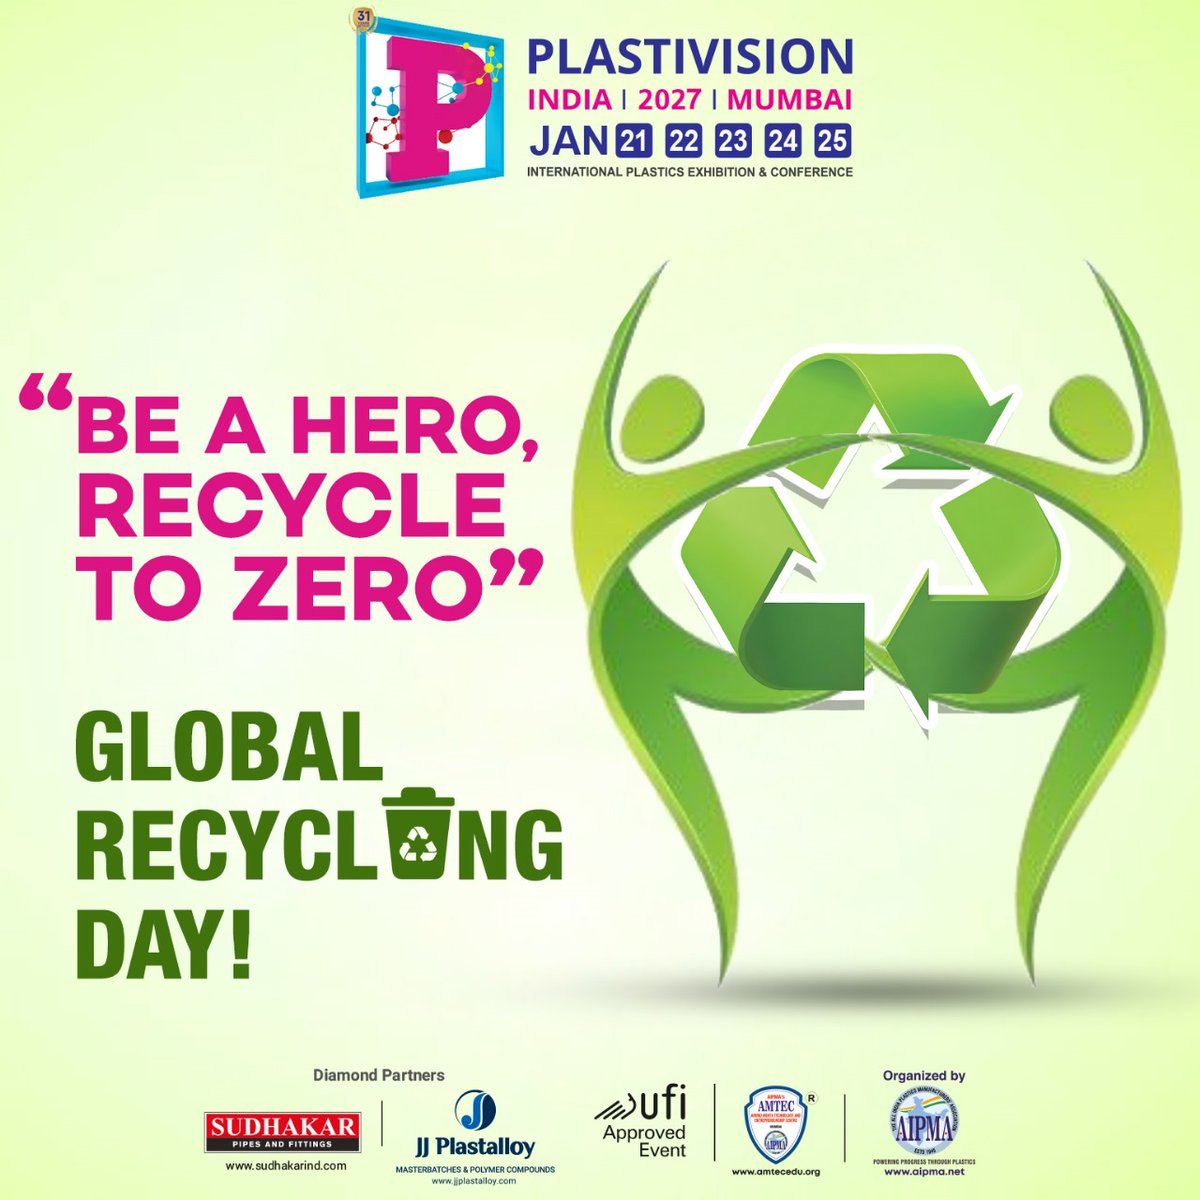 Recycled materials serve nation once more,

Improving competitiveness, prosperity & create job

Also save environment for gen next

Make India Stronger 

Recycle ♻

#PlastivisionIndia #GlobalRecyclingDay #recycling #upcycling #environment #PlasticsIndustry #PlasticsInnovation